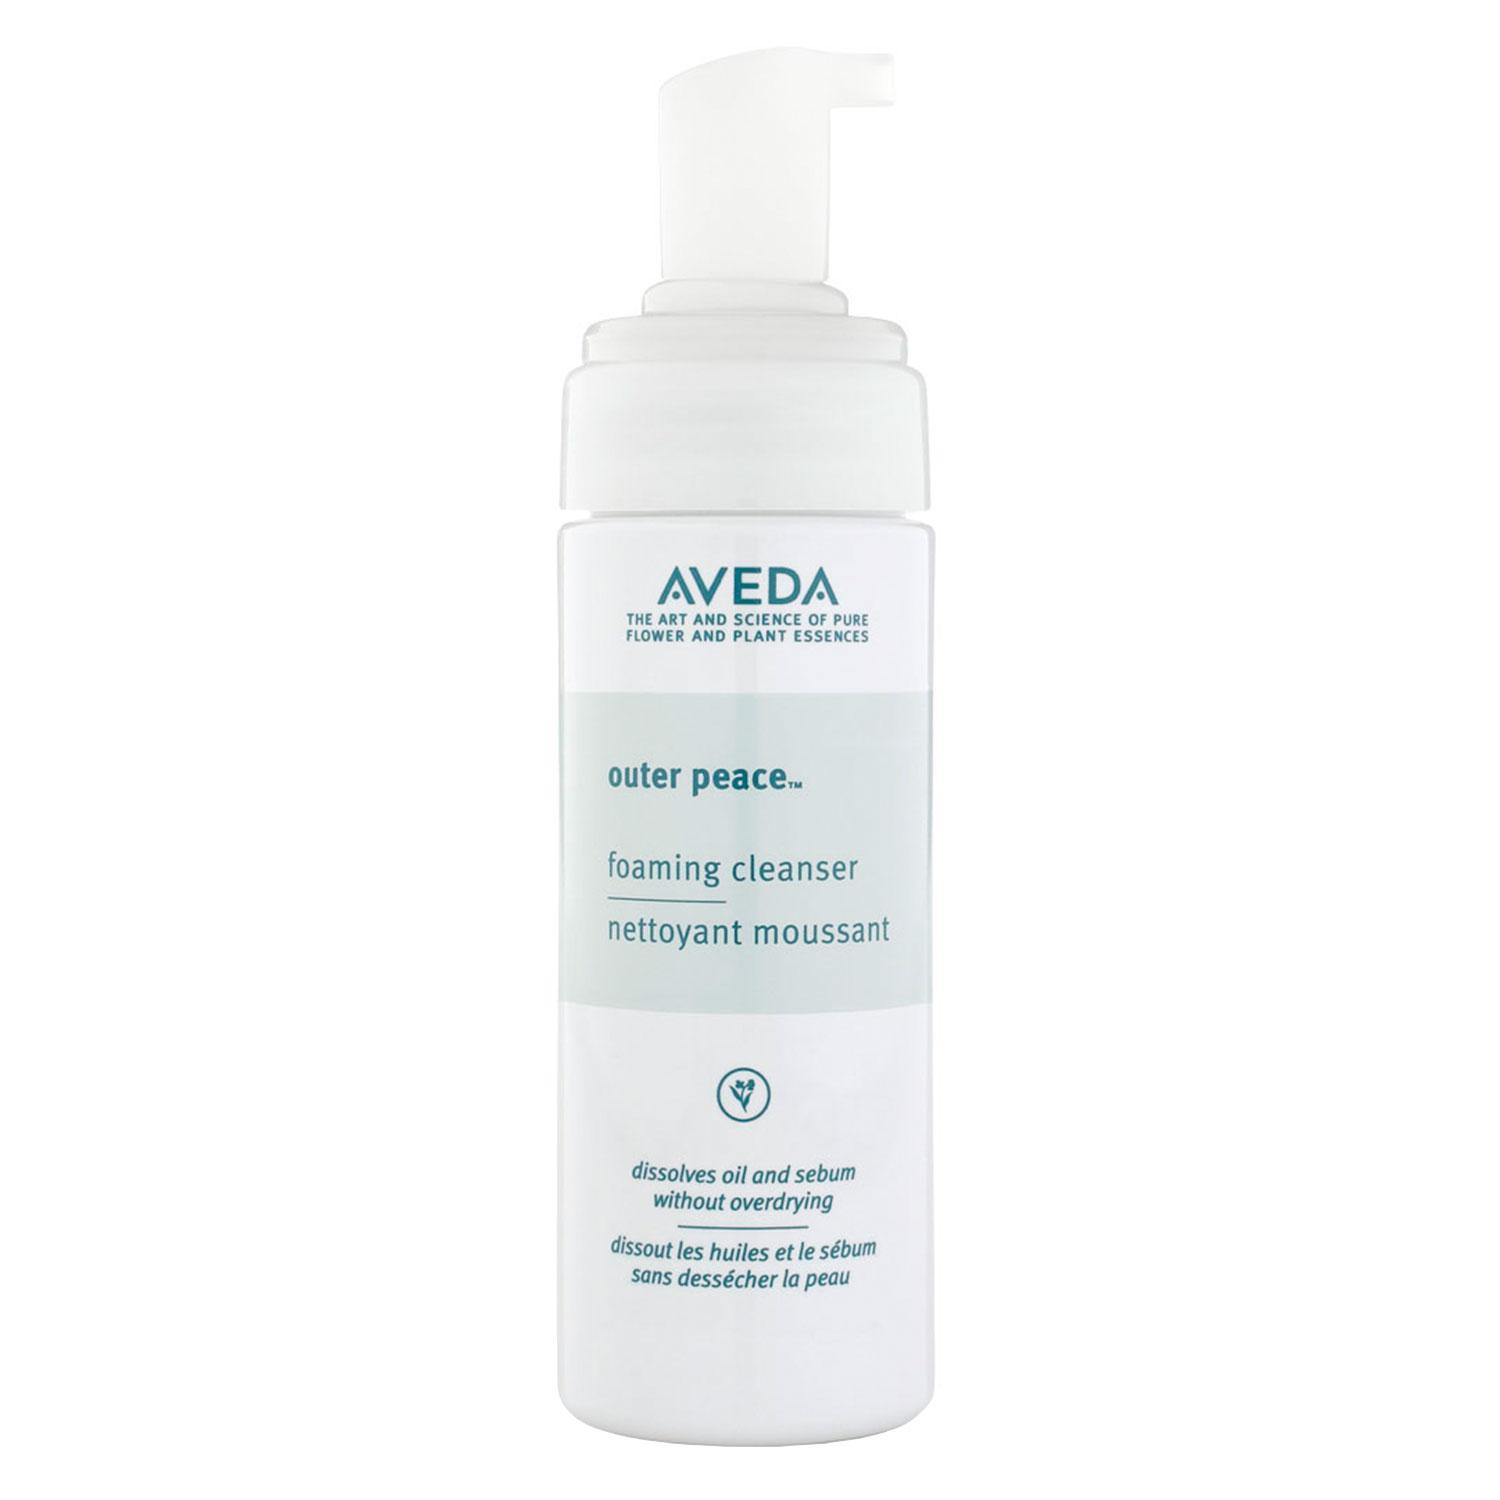 outer peace - foaming cleanser